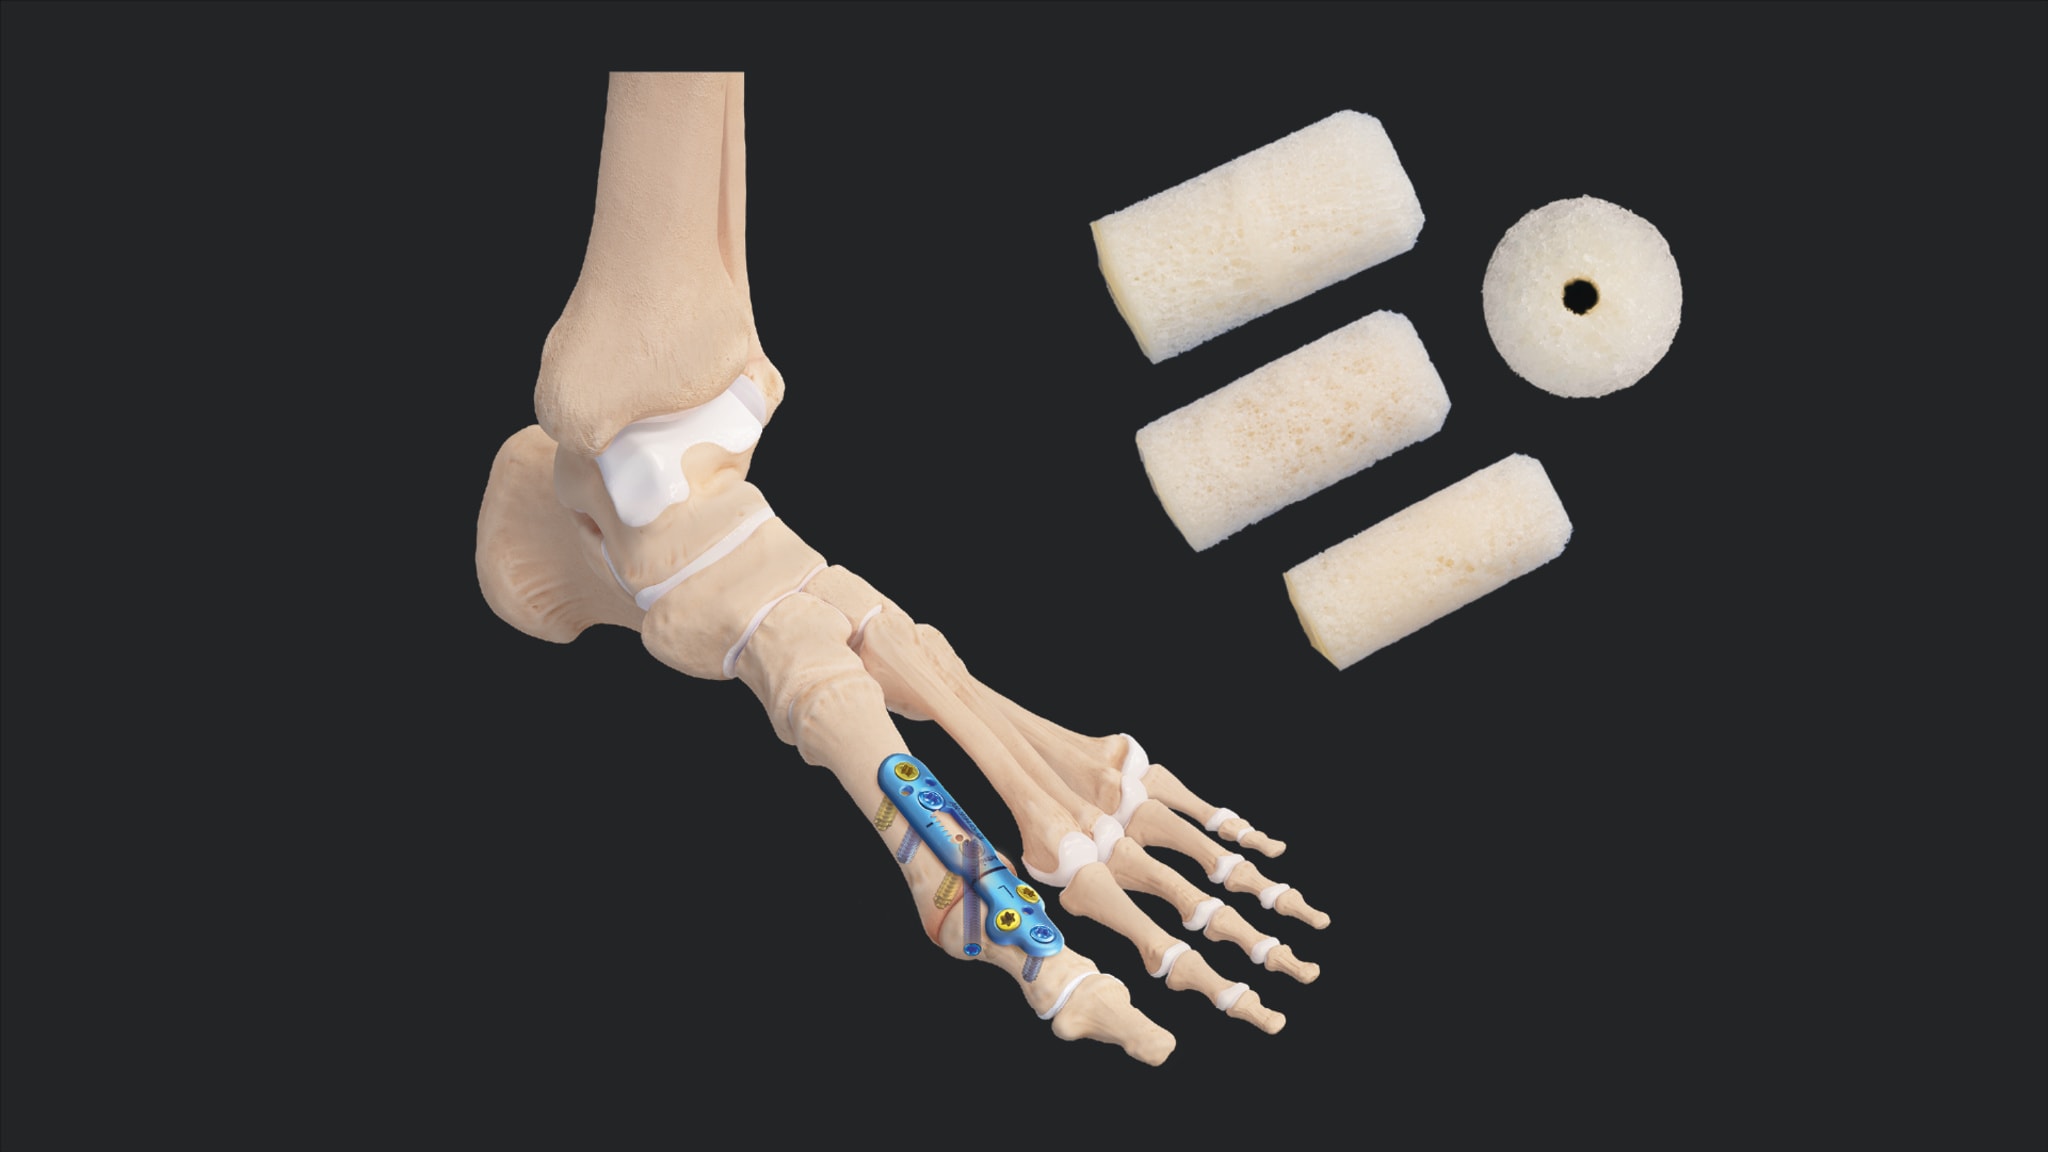 1st MTP Revision Using a Cannulated Revision Bone Dowel and Augmented With ArthroCell™ Viable Bone Matrix